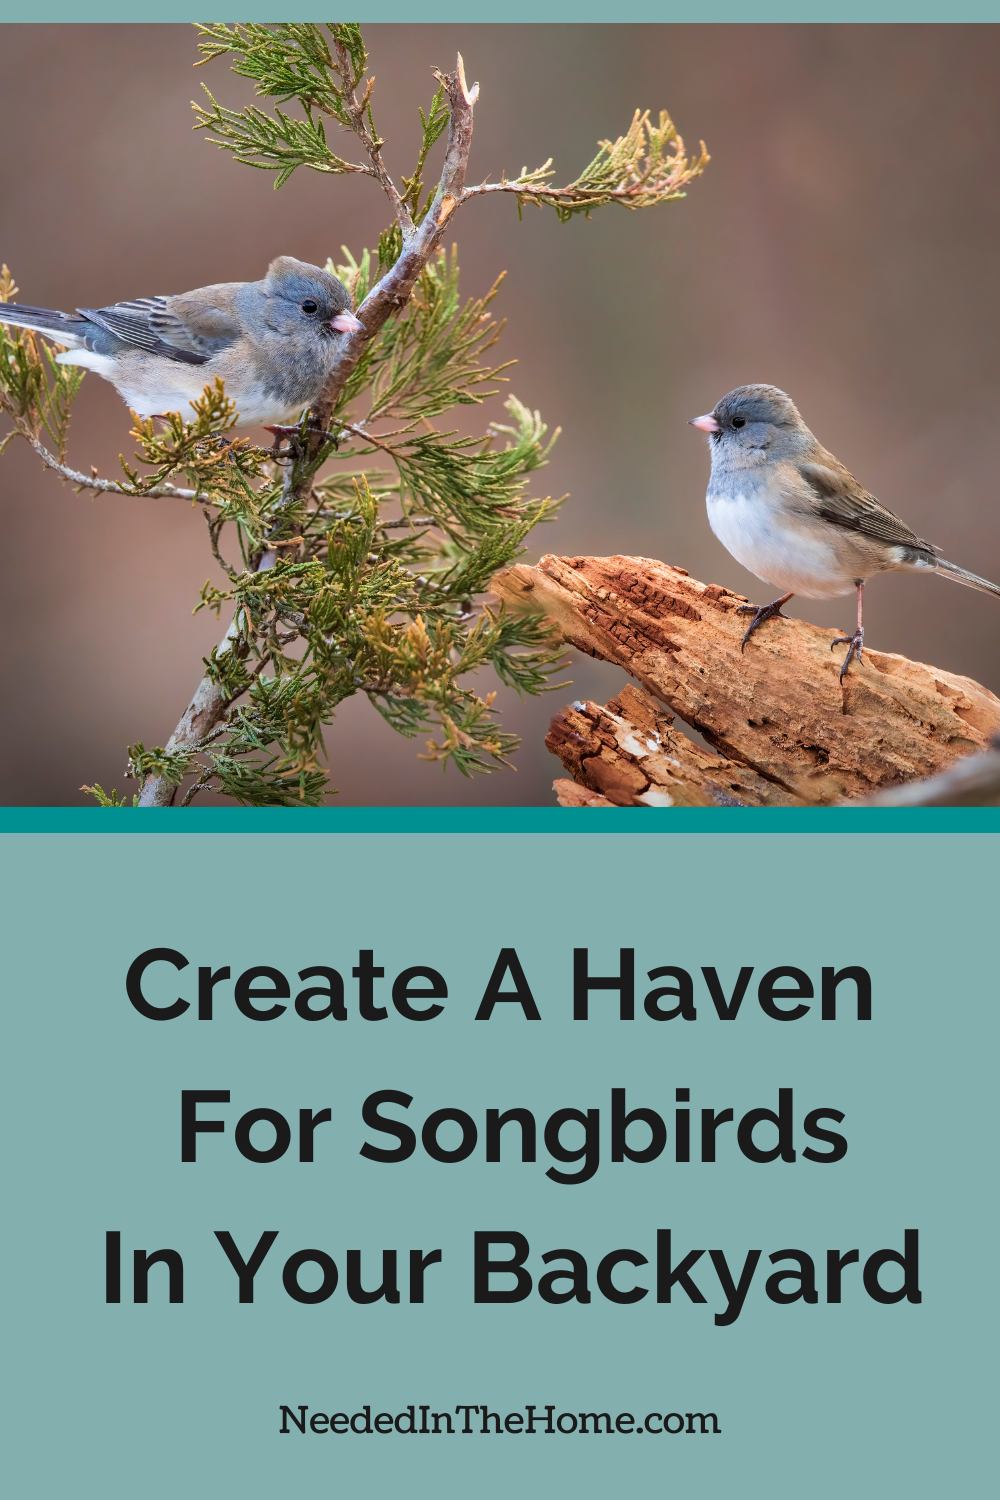 songbirds on tree branches create a haven for songbirds in your backyard neededinthehome